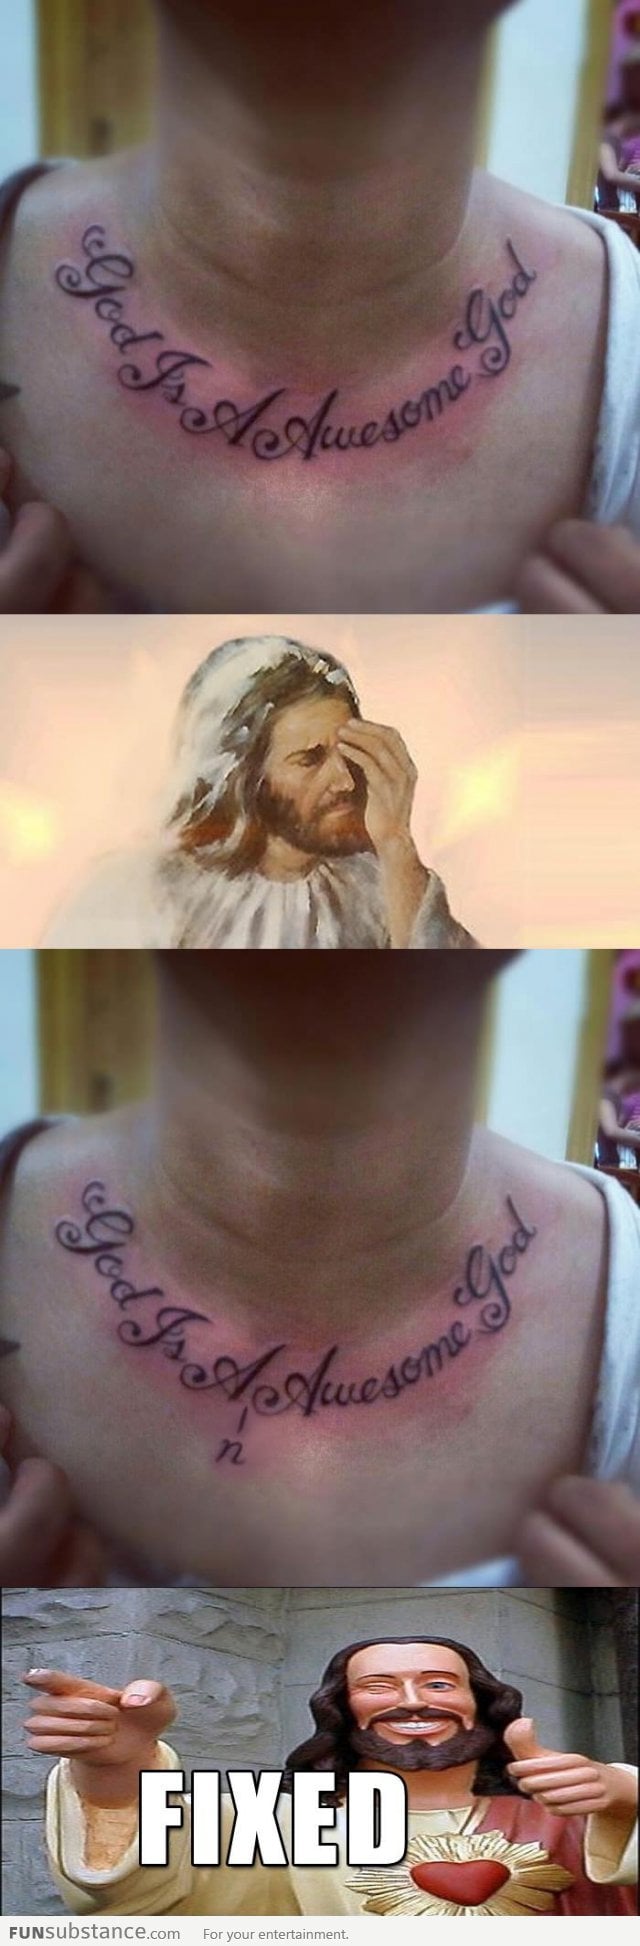 I prayed for a tattoo removal